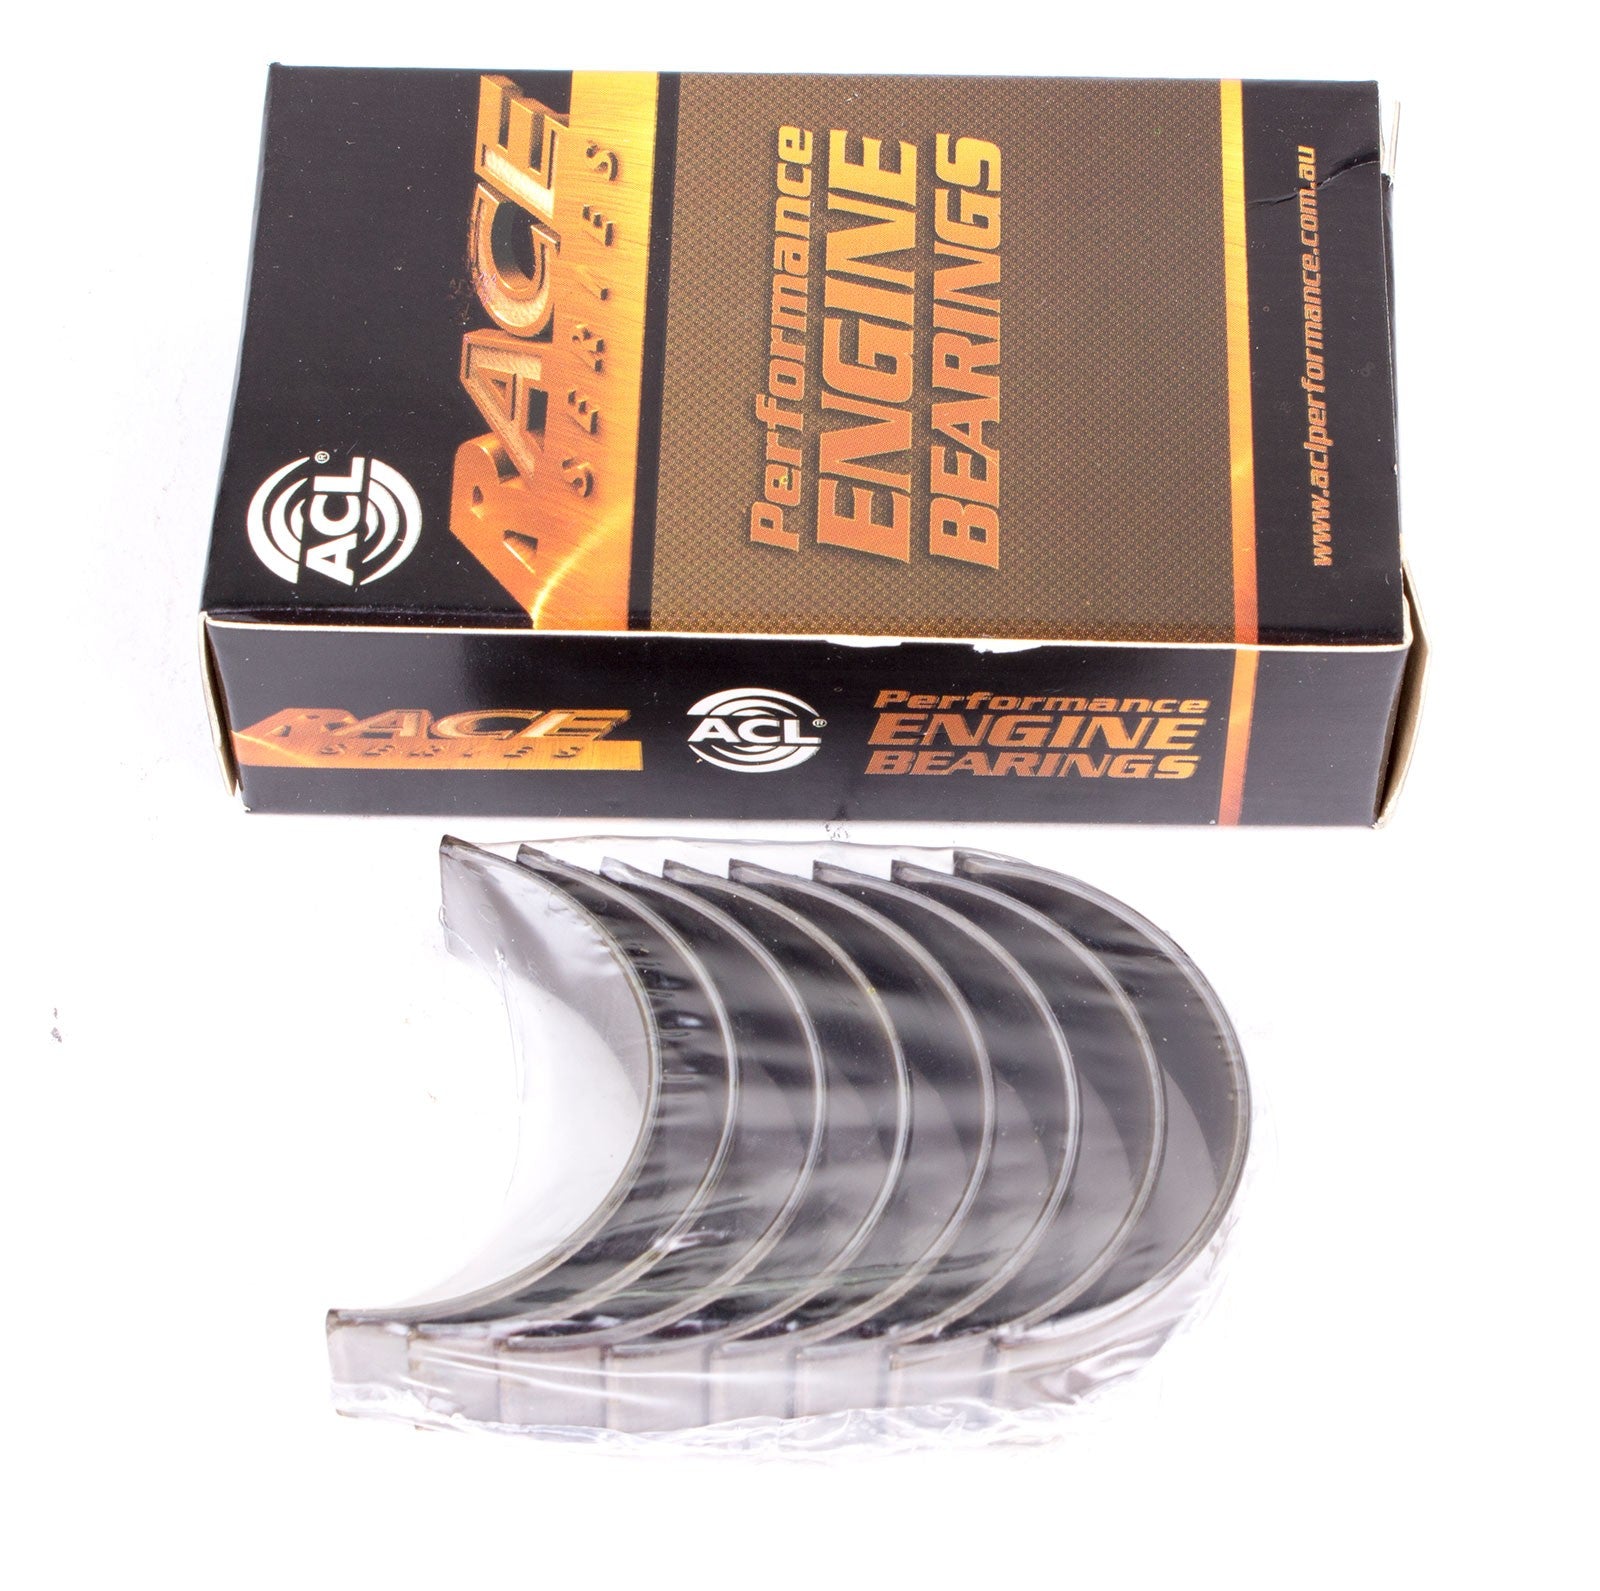 ACL 5M2905H-.25 Main bearing set (ACL Race Series) Photo-0 